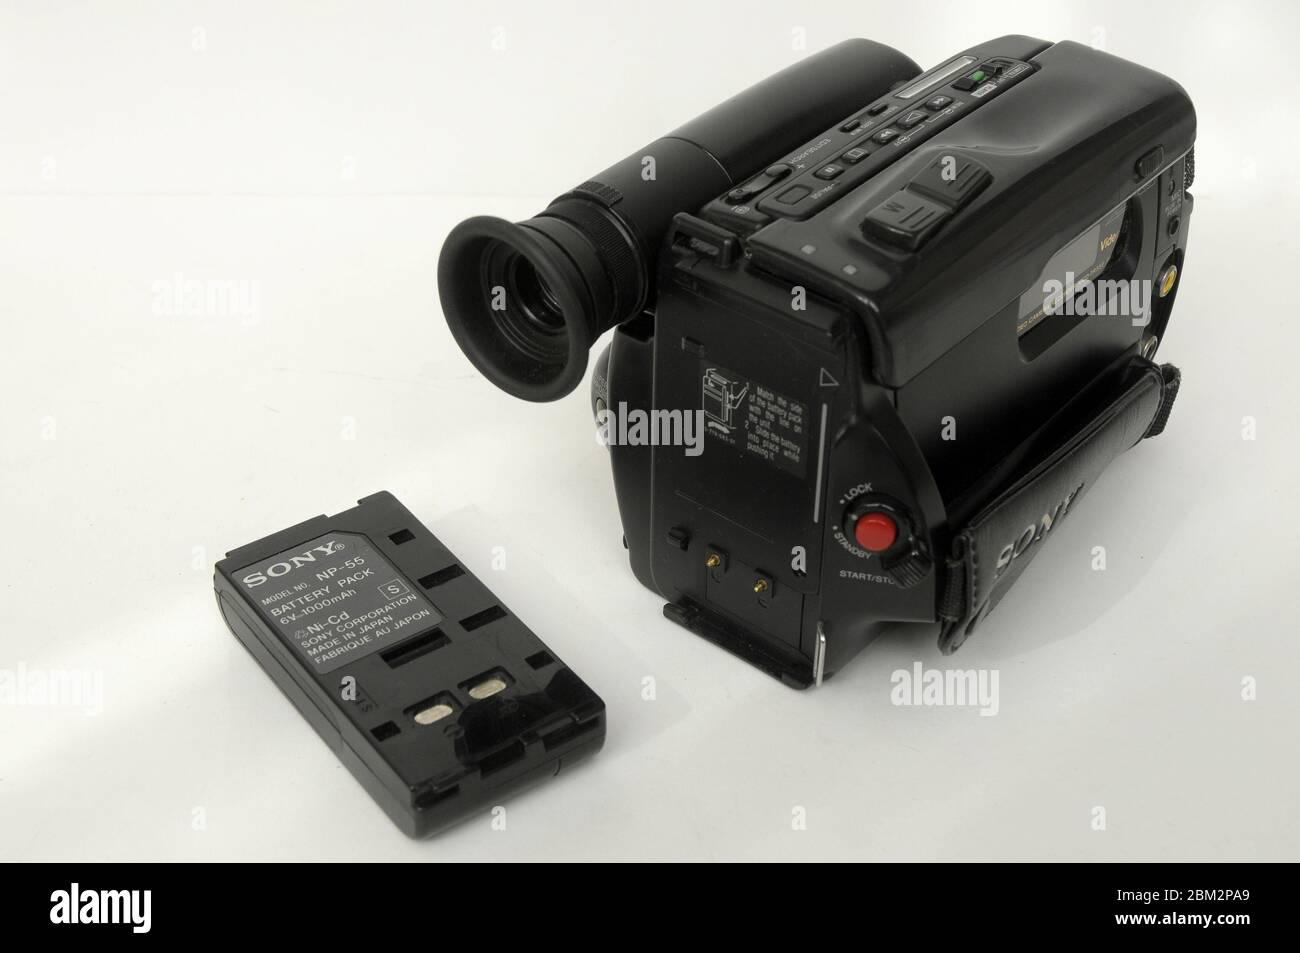 Sony Video Camera High Resolution Stock Photography and Images - Alamy